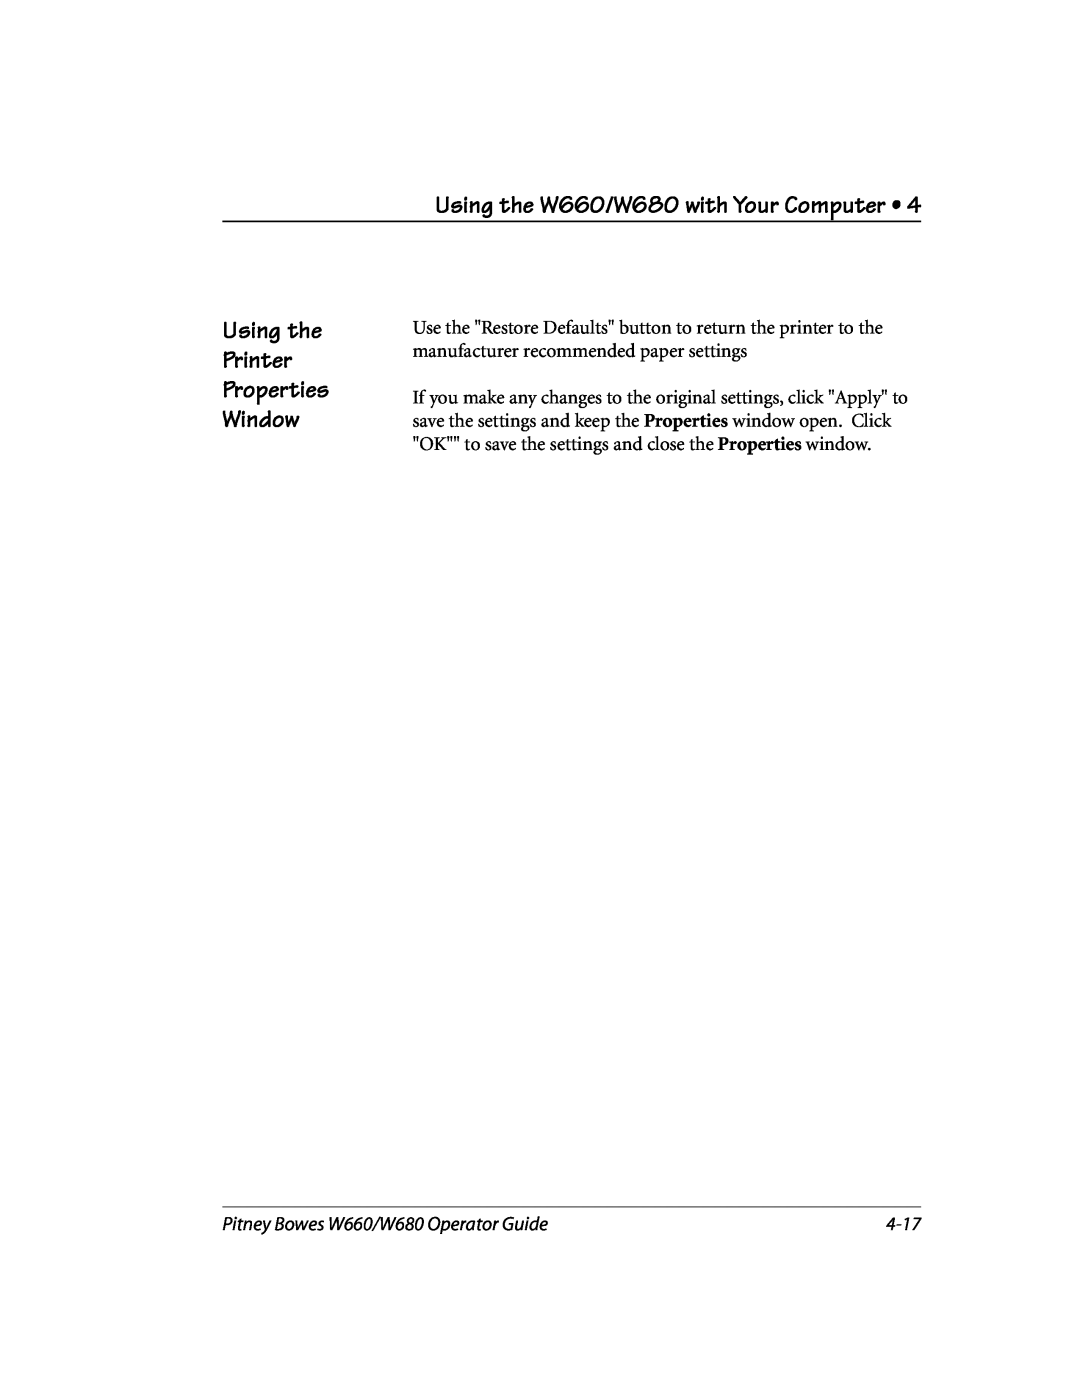 Pitney Bowes manual 4-17, Using the Printer Properties Window, Using the W660/W680 with Your Computer 